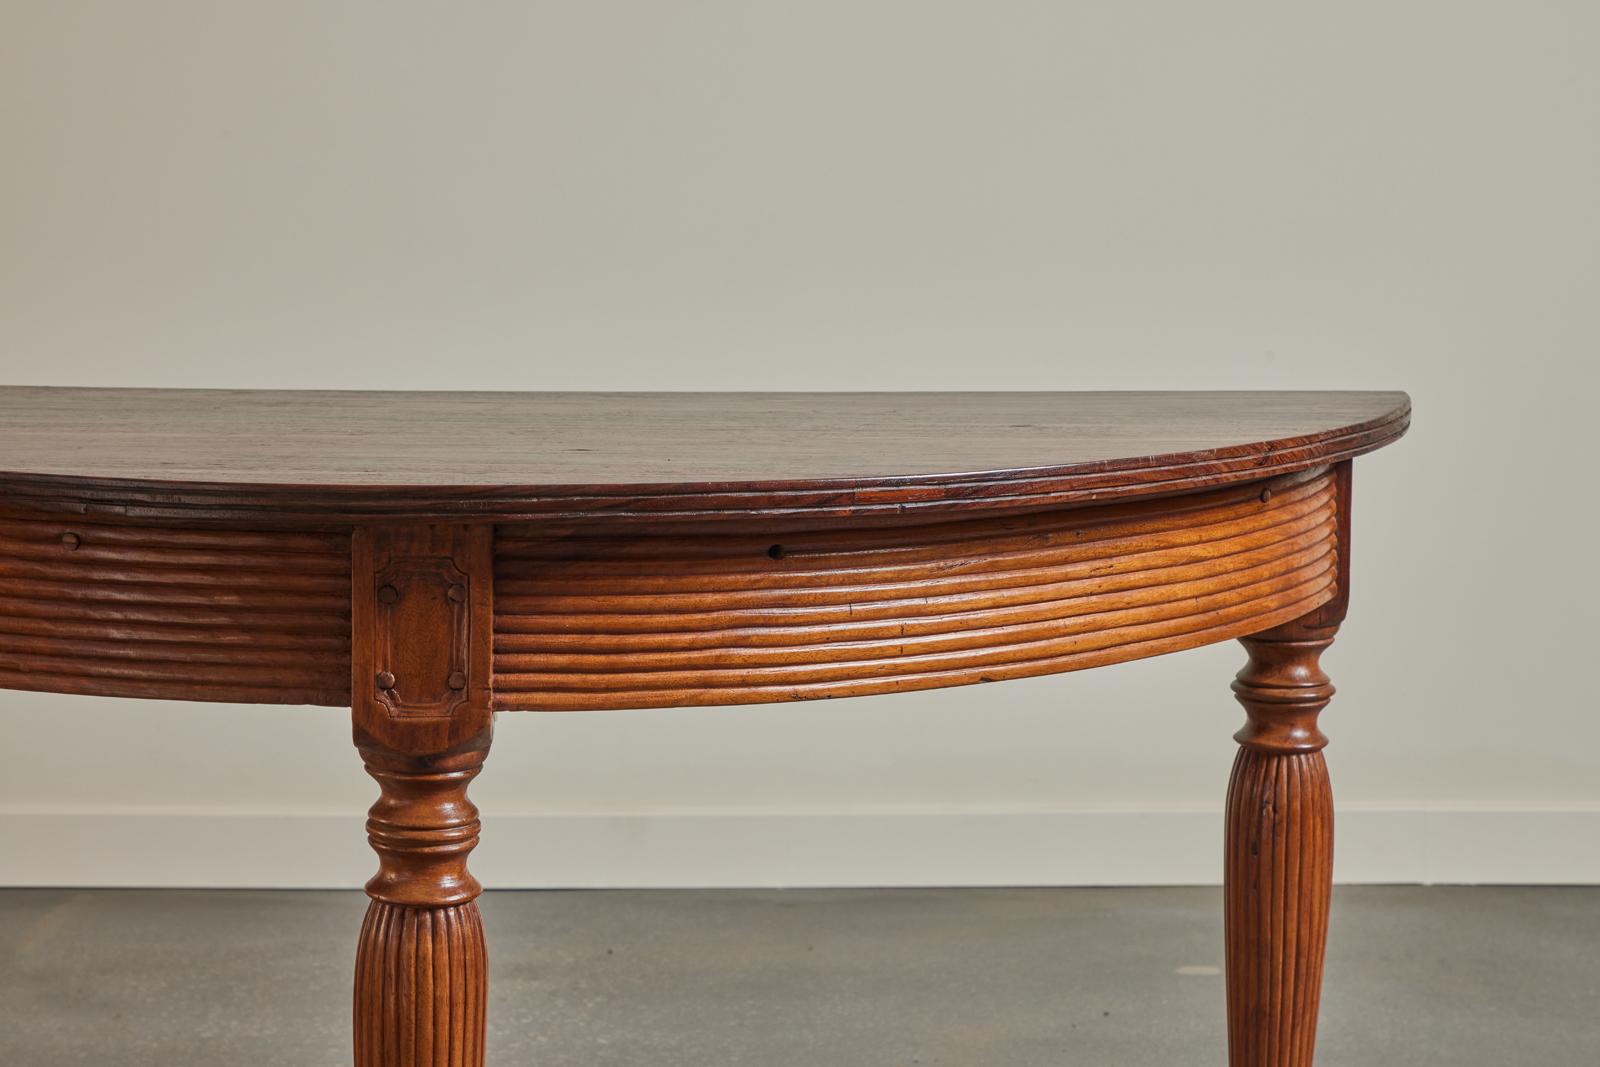 A wonderful 19th century colonial Demi-Lune table made in Indonesia. The legs and apron are teak, fluted and carved on all sides meaning it can be used in the middle of a room. The top is figured Kamagong, a species unique to and highly favored by